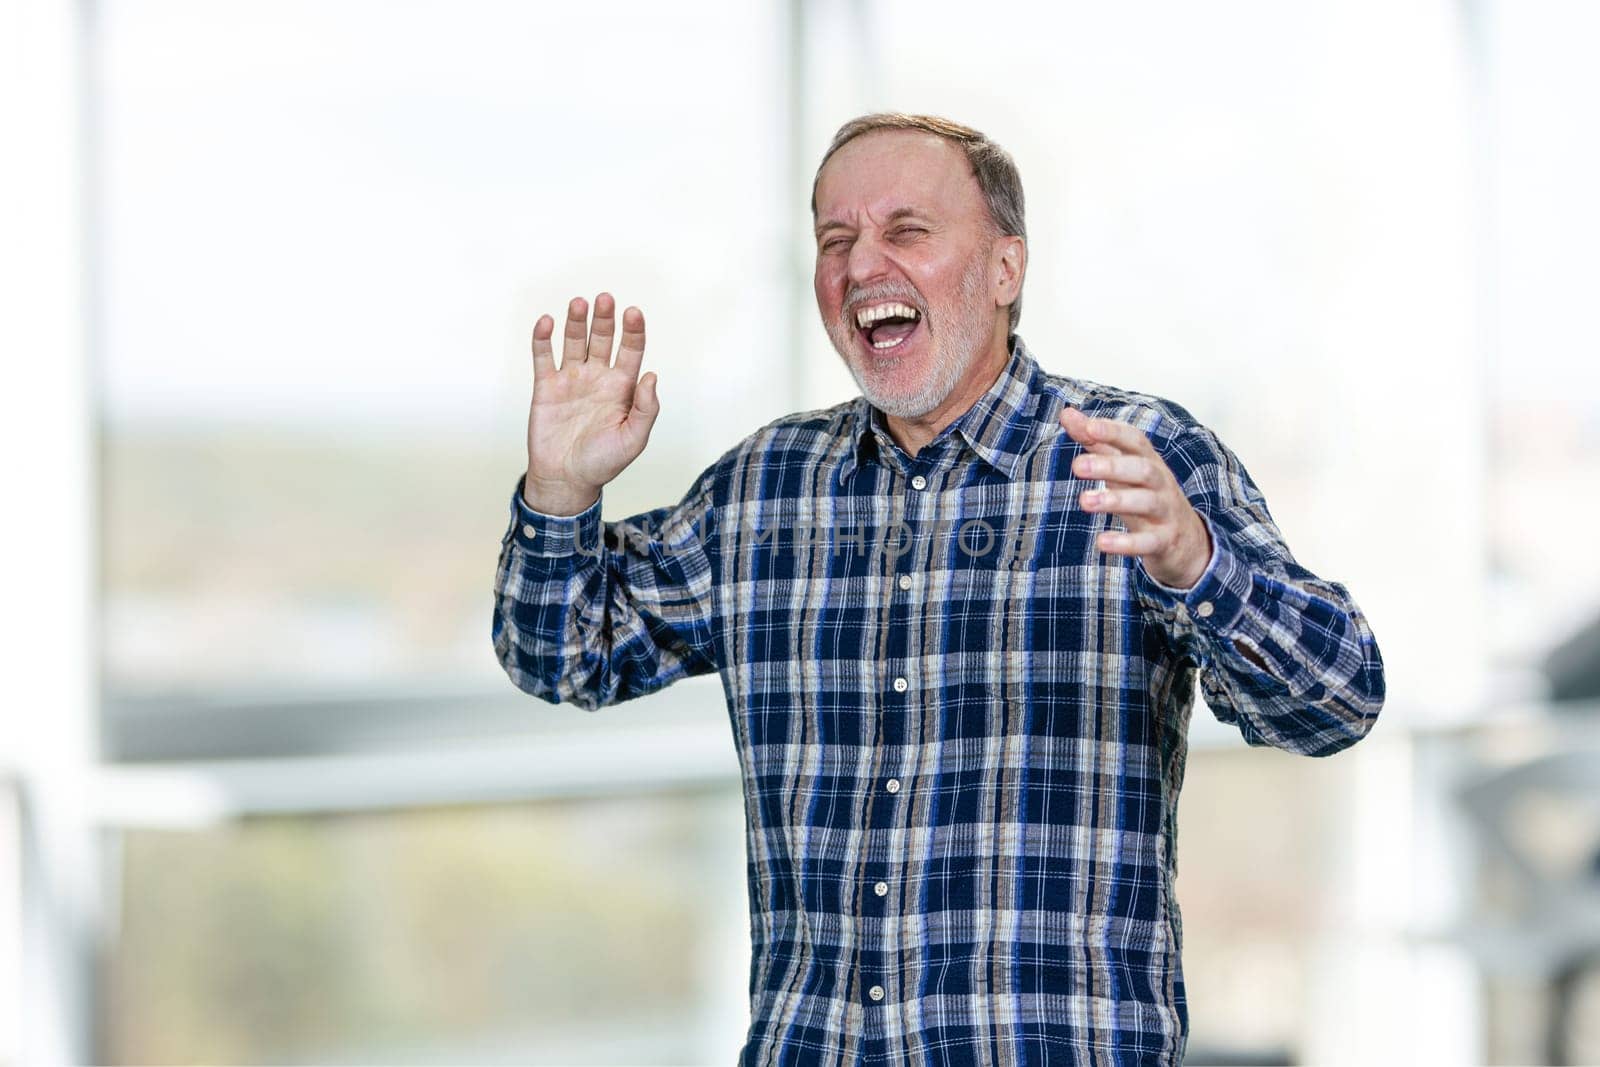 Portrait of handsome middle aged man is laughing out loud. Bright indoor background.